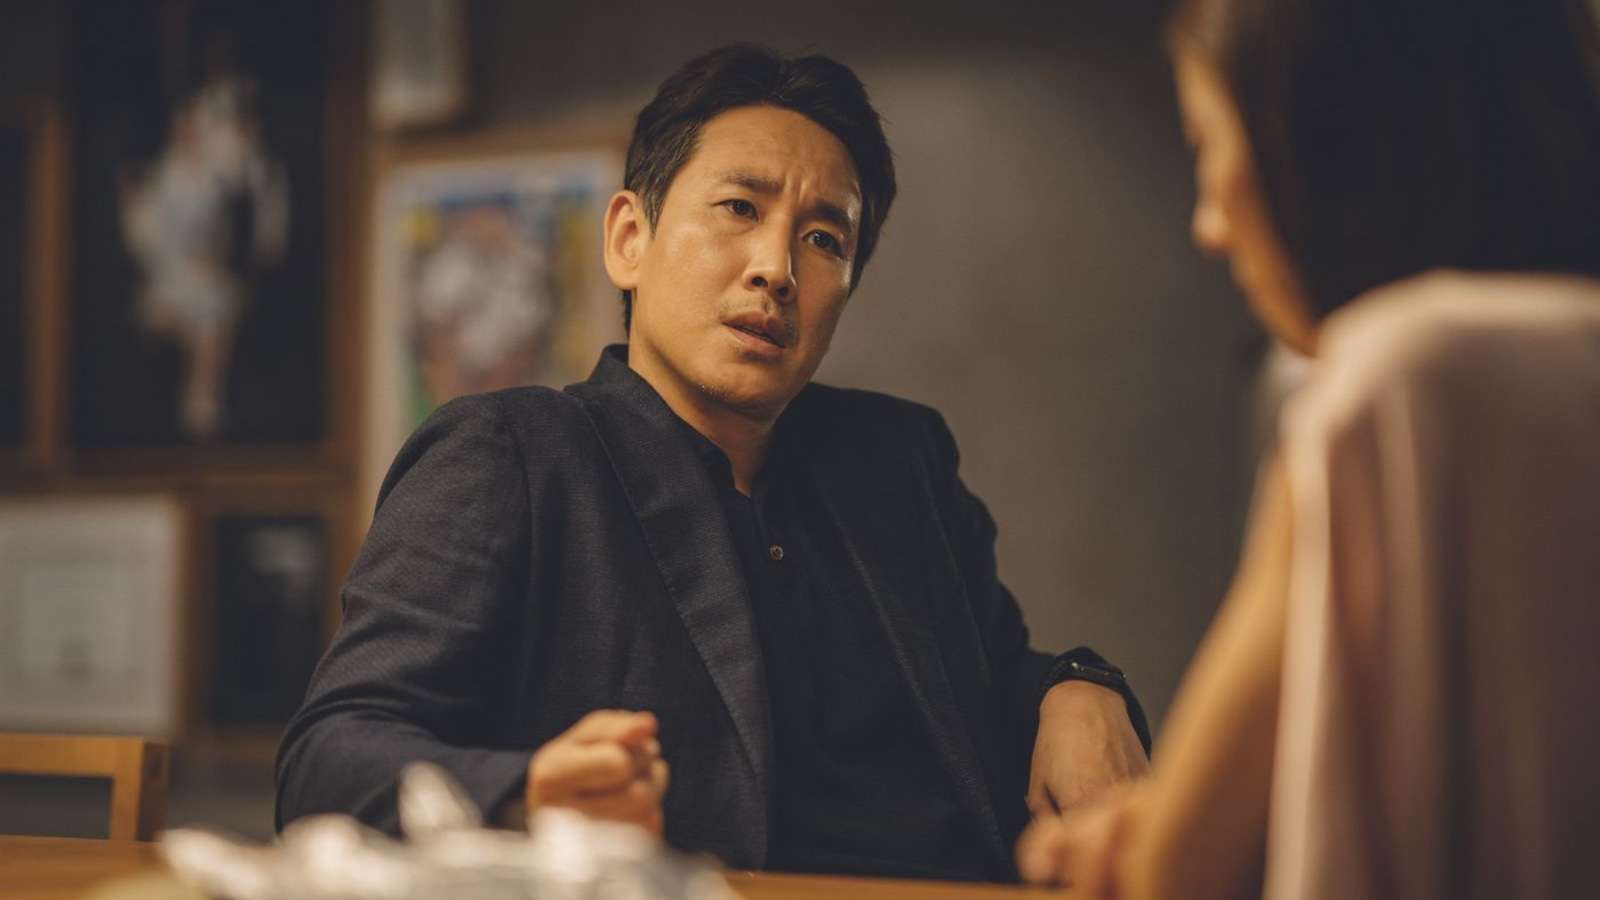 Park Dong-ik played by Lee Sun-kyun in Parasite.